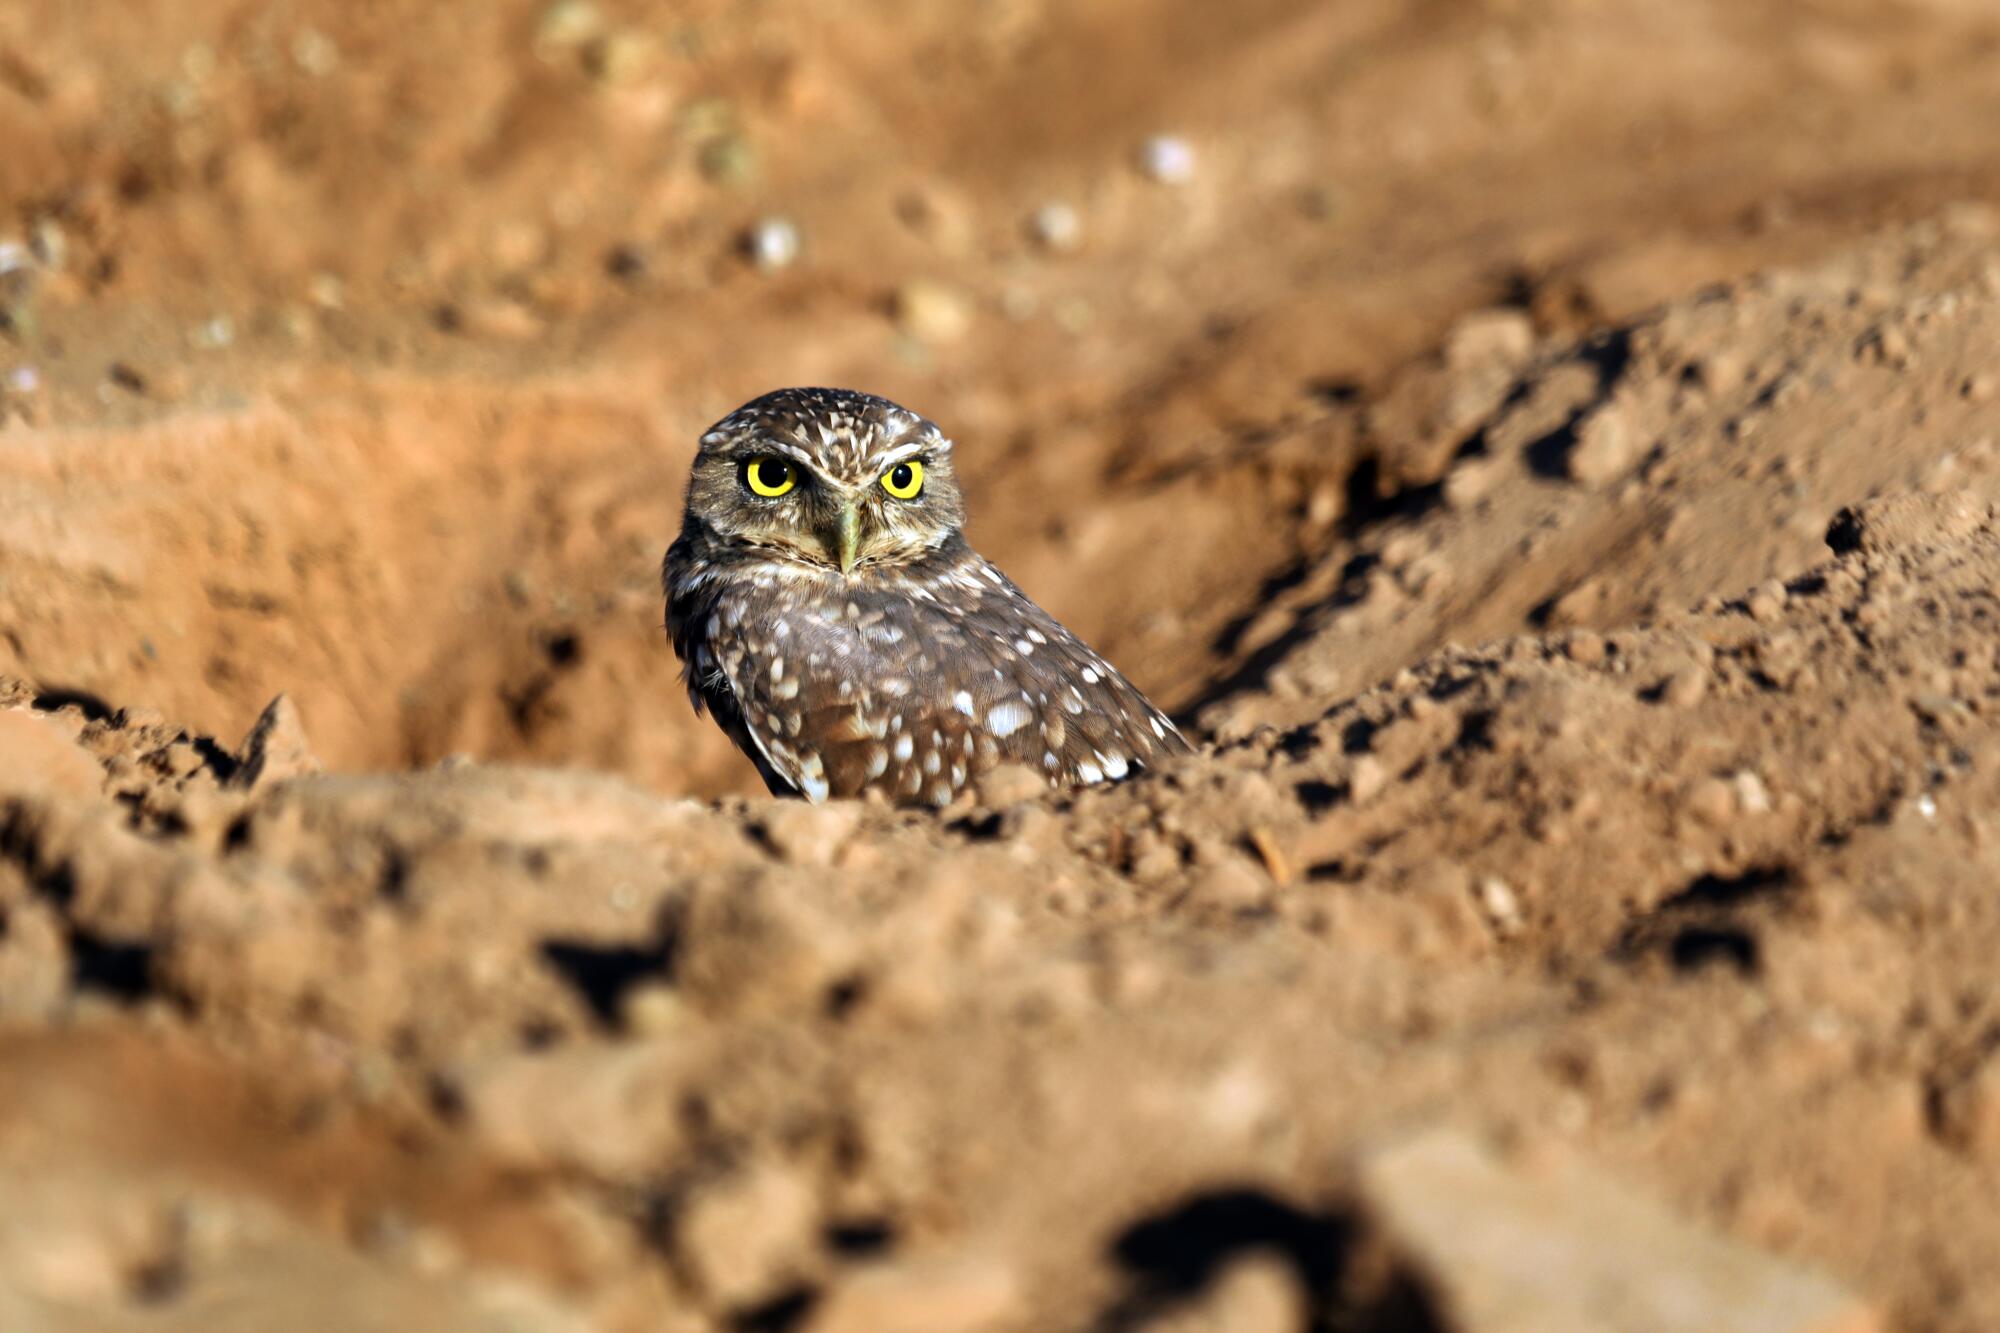 A burrowing owl, brown with white spots and bright yellow eyes, in a dirt landscape.